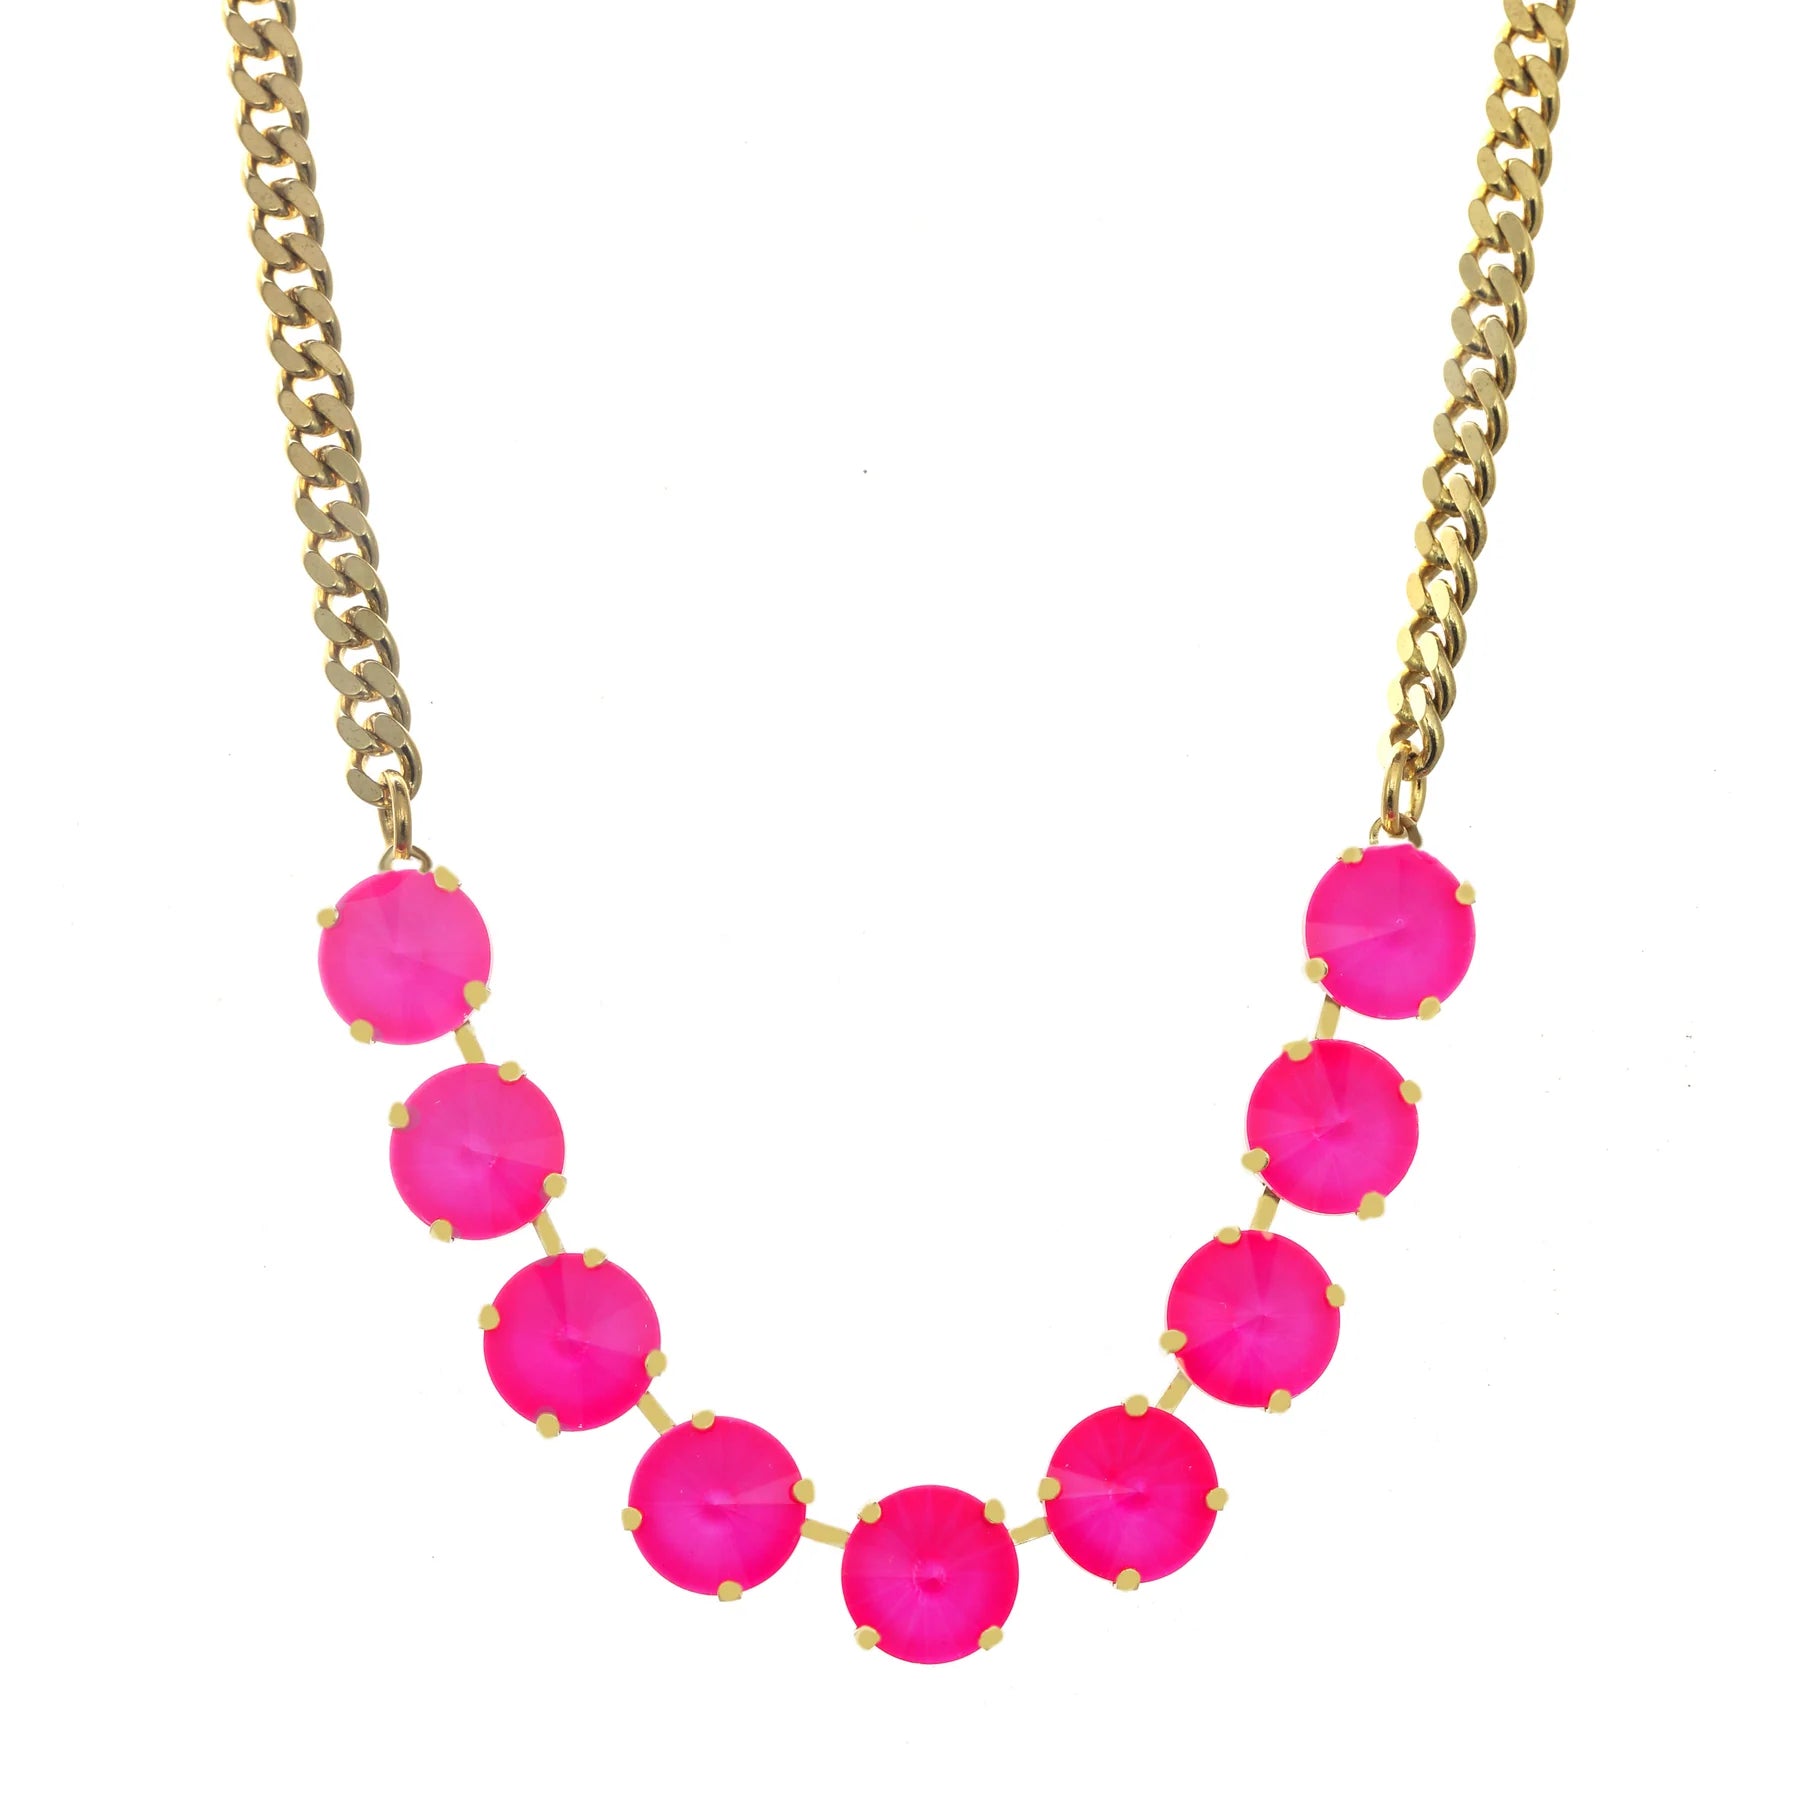 MINI SOFIA NECKLACE IN ELECTRIC PINK